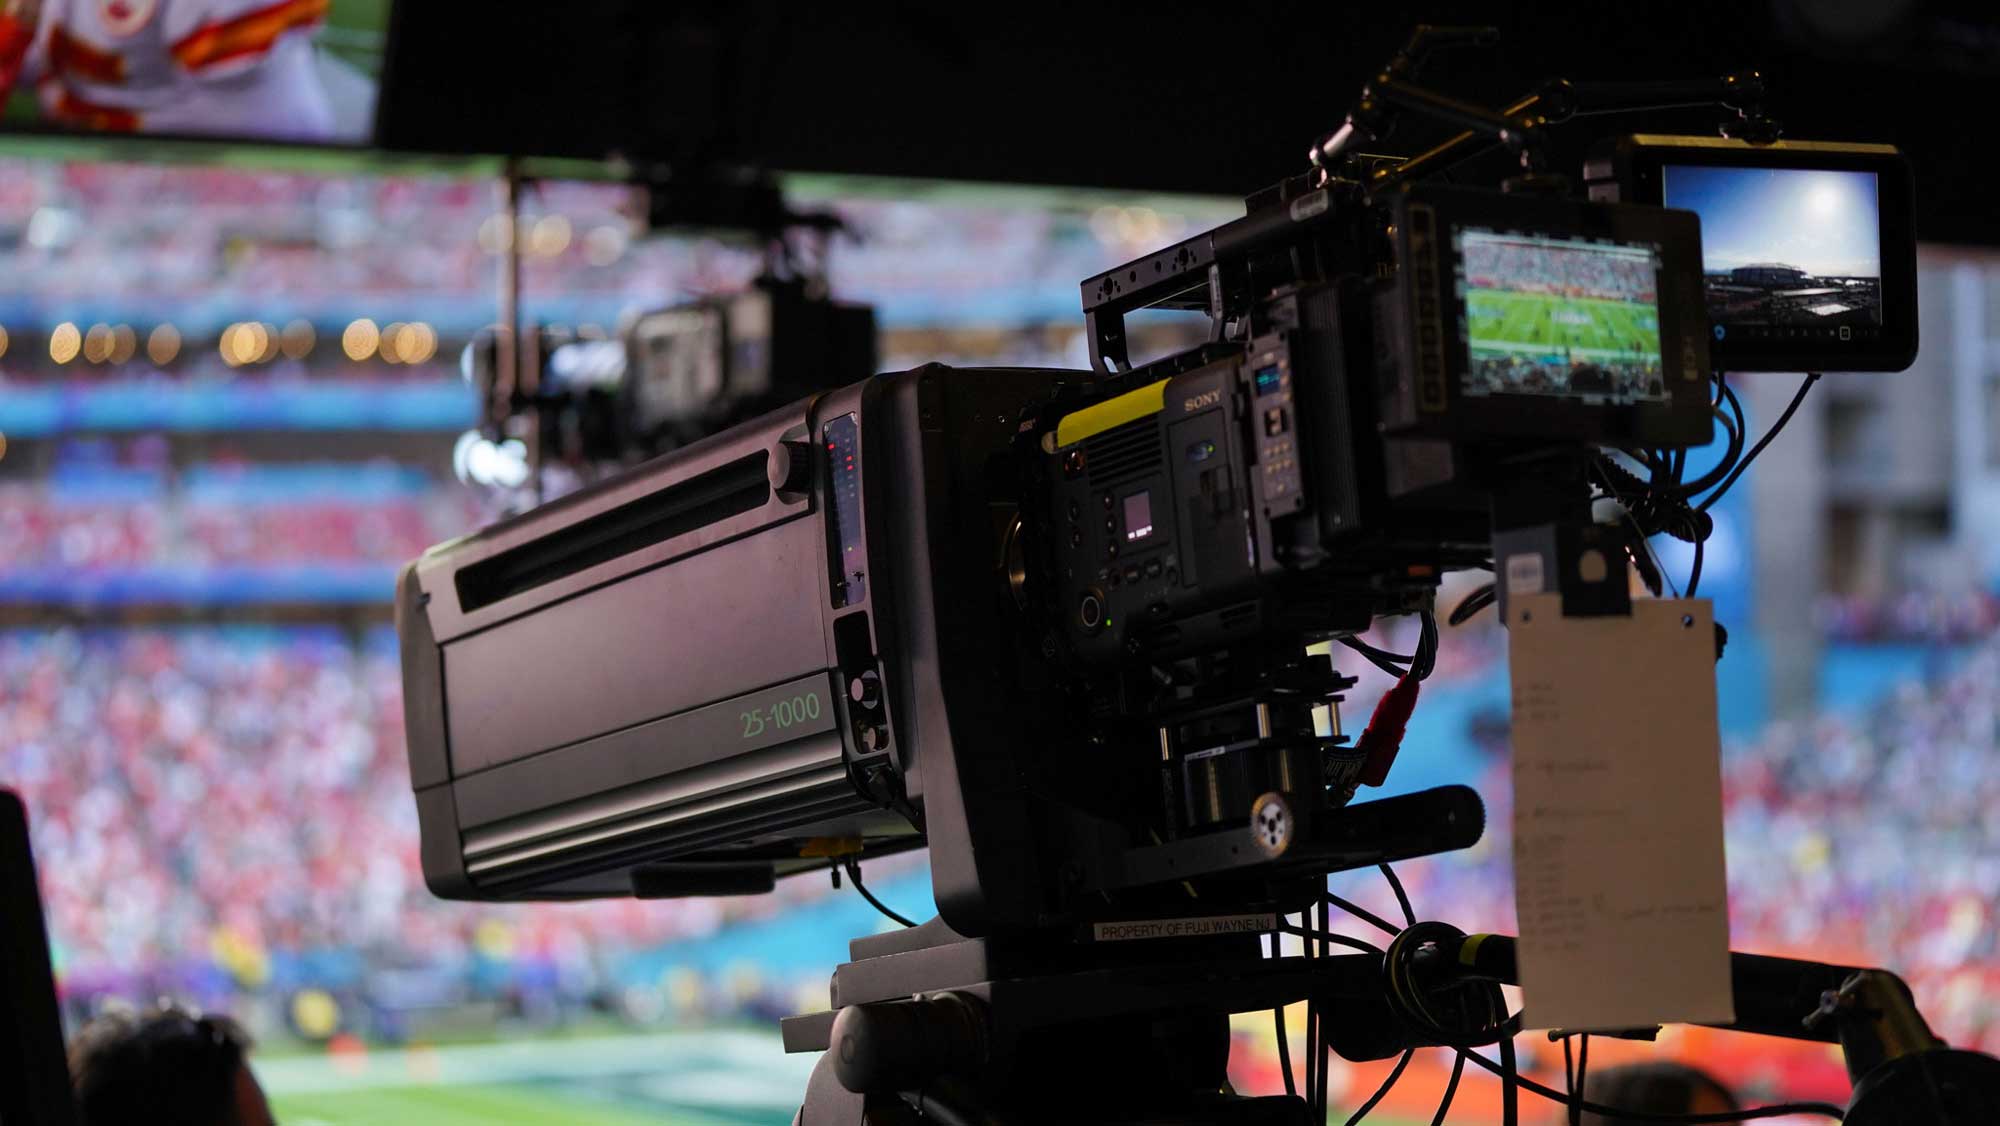 FUJINON DuvoTM HZK25-1000mm Touches Down at the Halftime Show